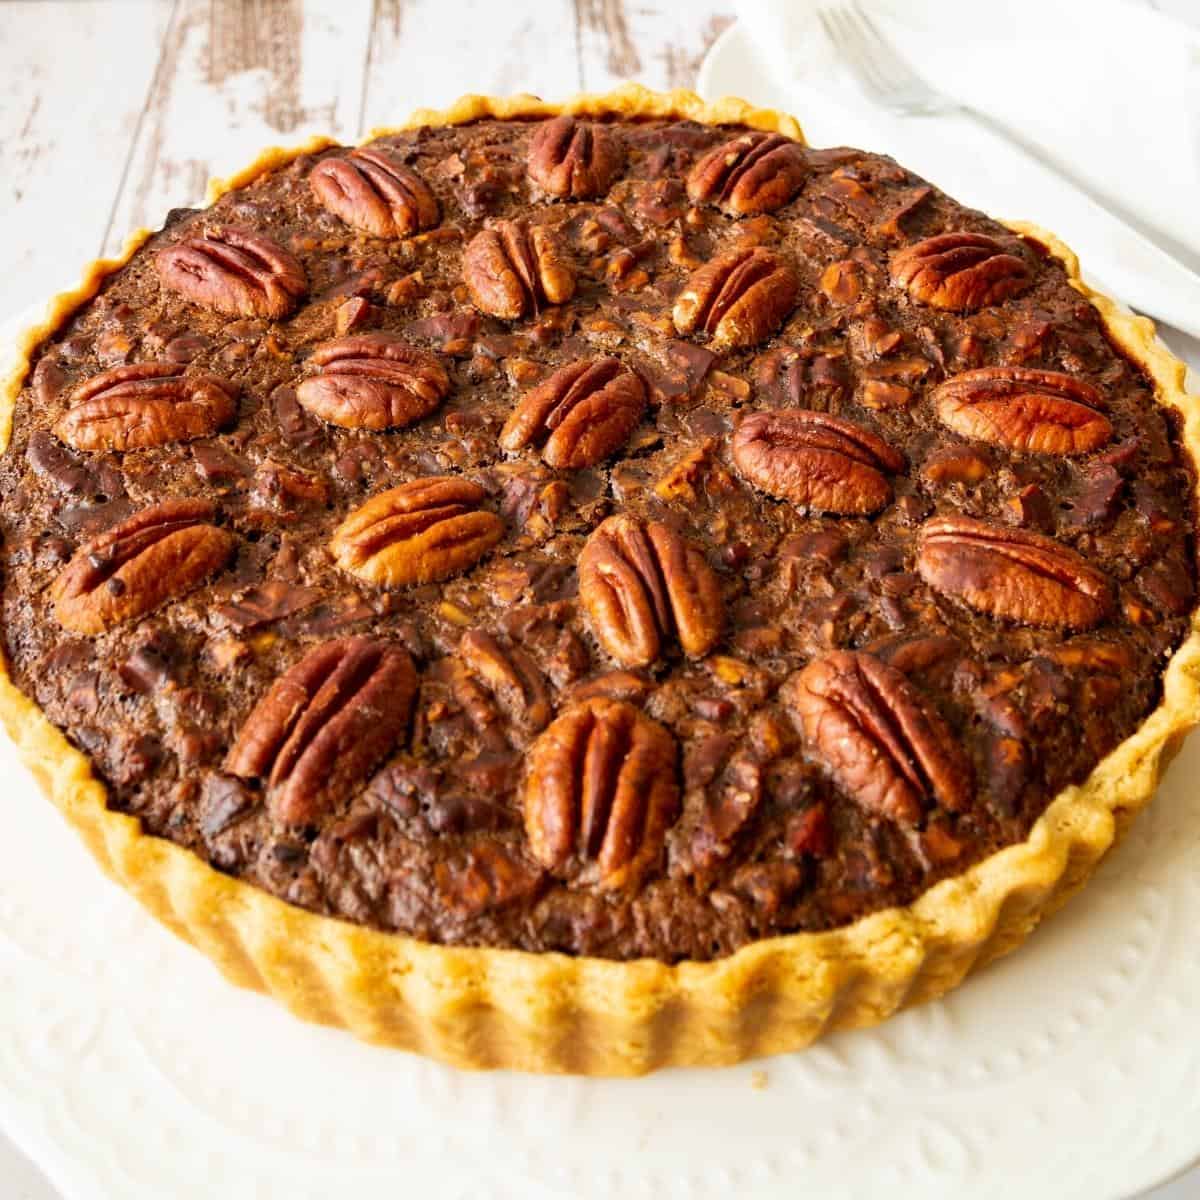 A chocolate pie with pecans on a cake stand.